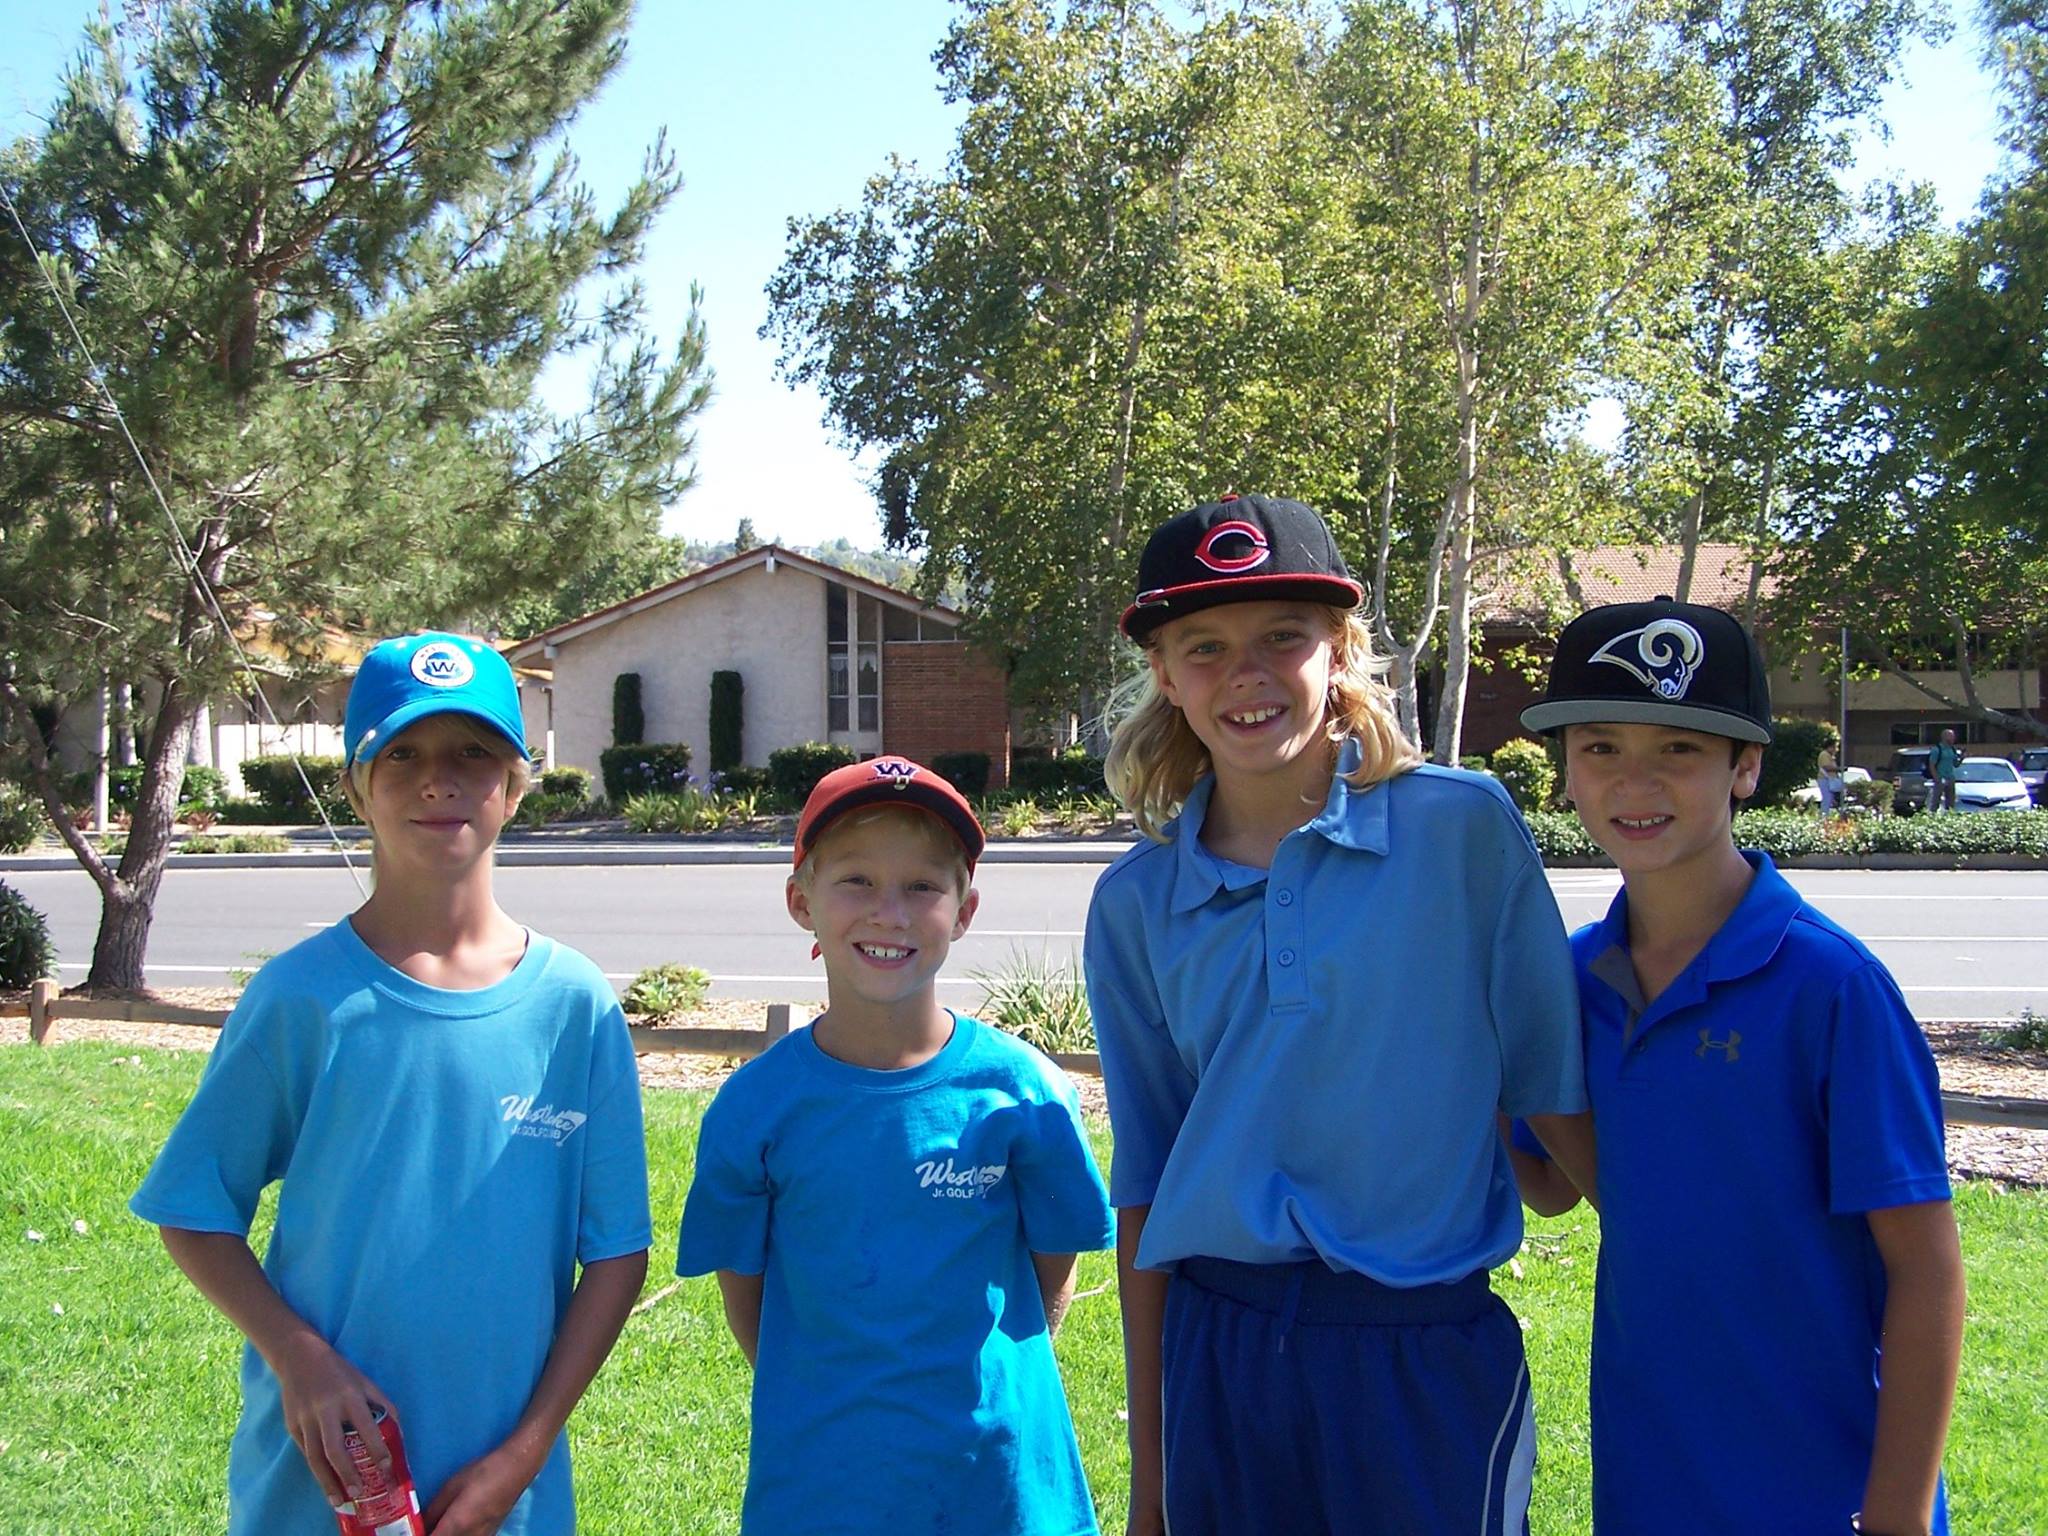 The 5th of Nine "Slideshow" Images, Which Perfectly Demonstrate the Fun on Display at Westlake Golf Club's Instructional Junior Golf Programs – Open to Boys and Girls (Ages 8 to 17) of All Skill Levels